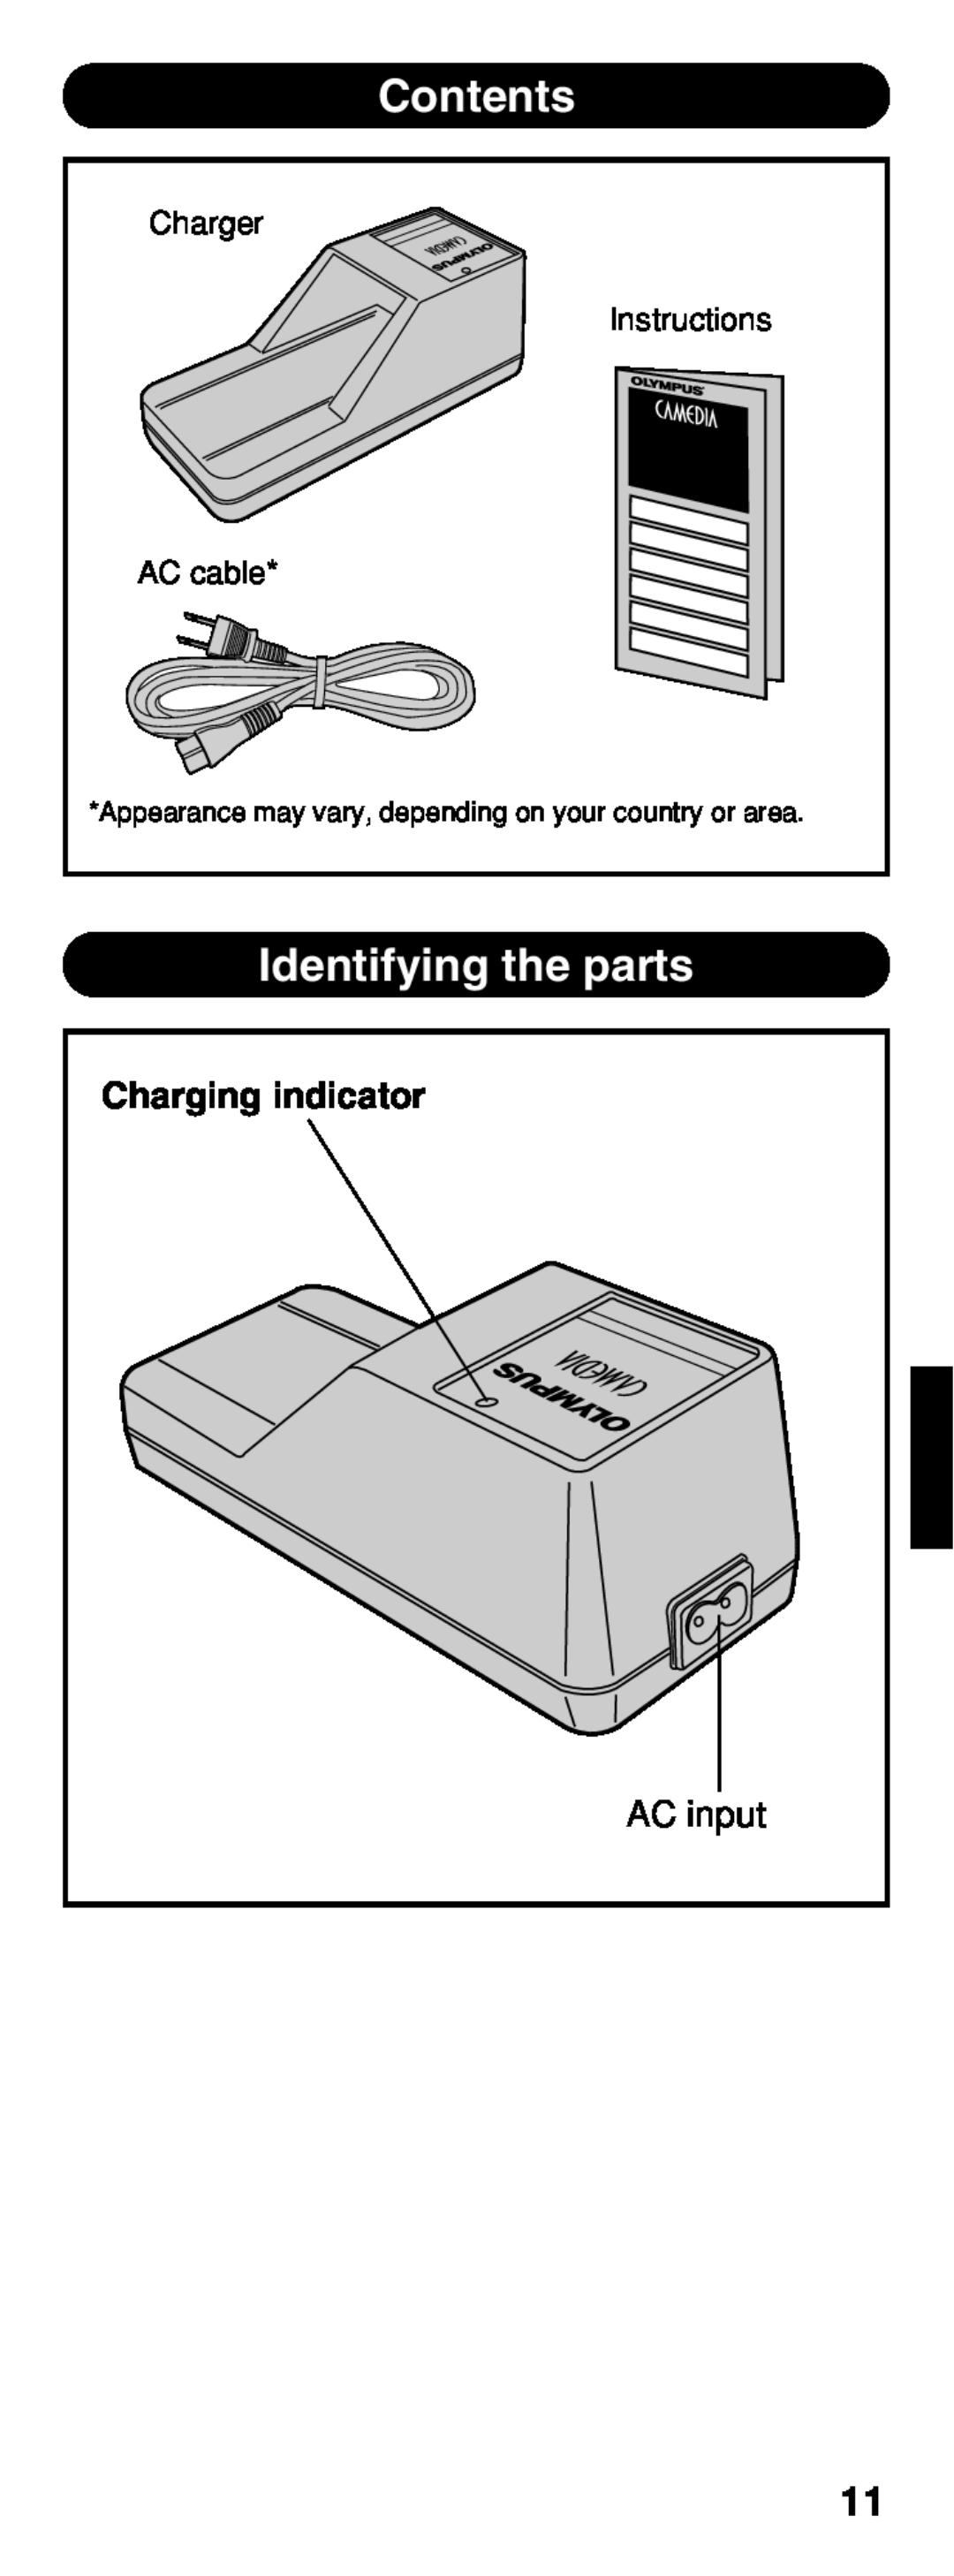 Olympus B-20 LPC instruction manual Contents, Identifying the parts, Charging indicator 